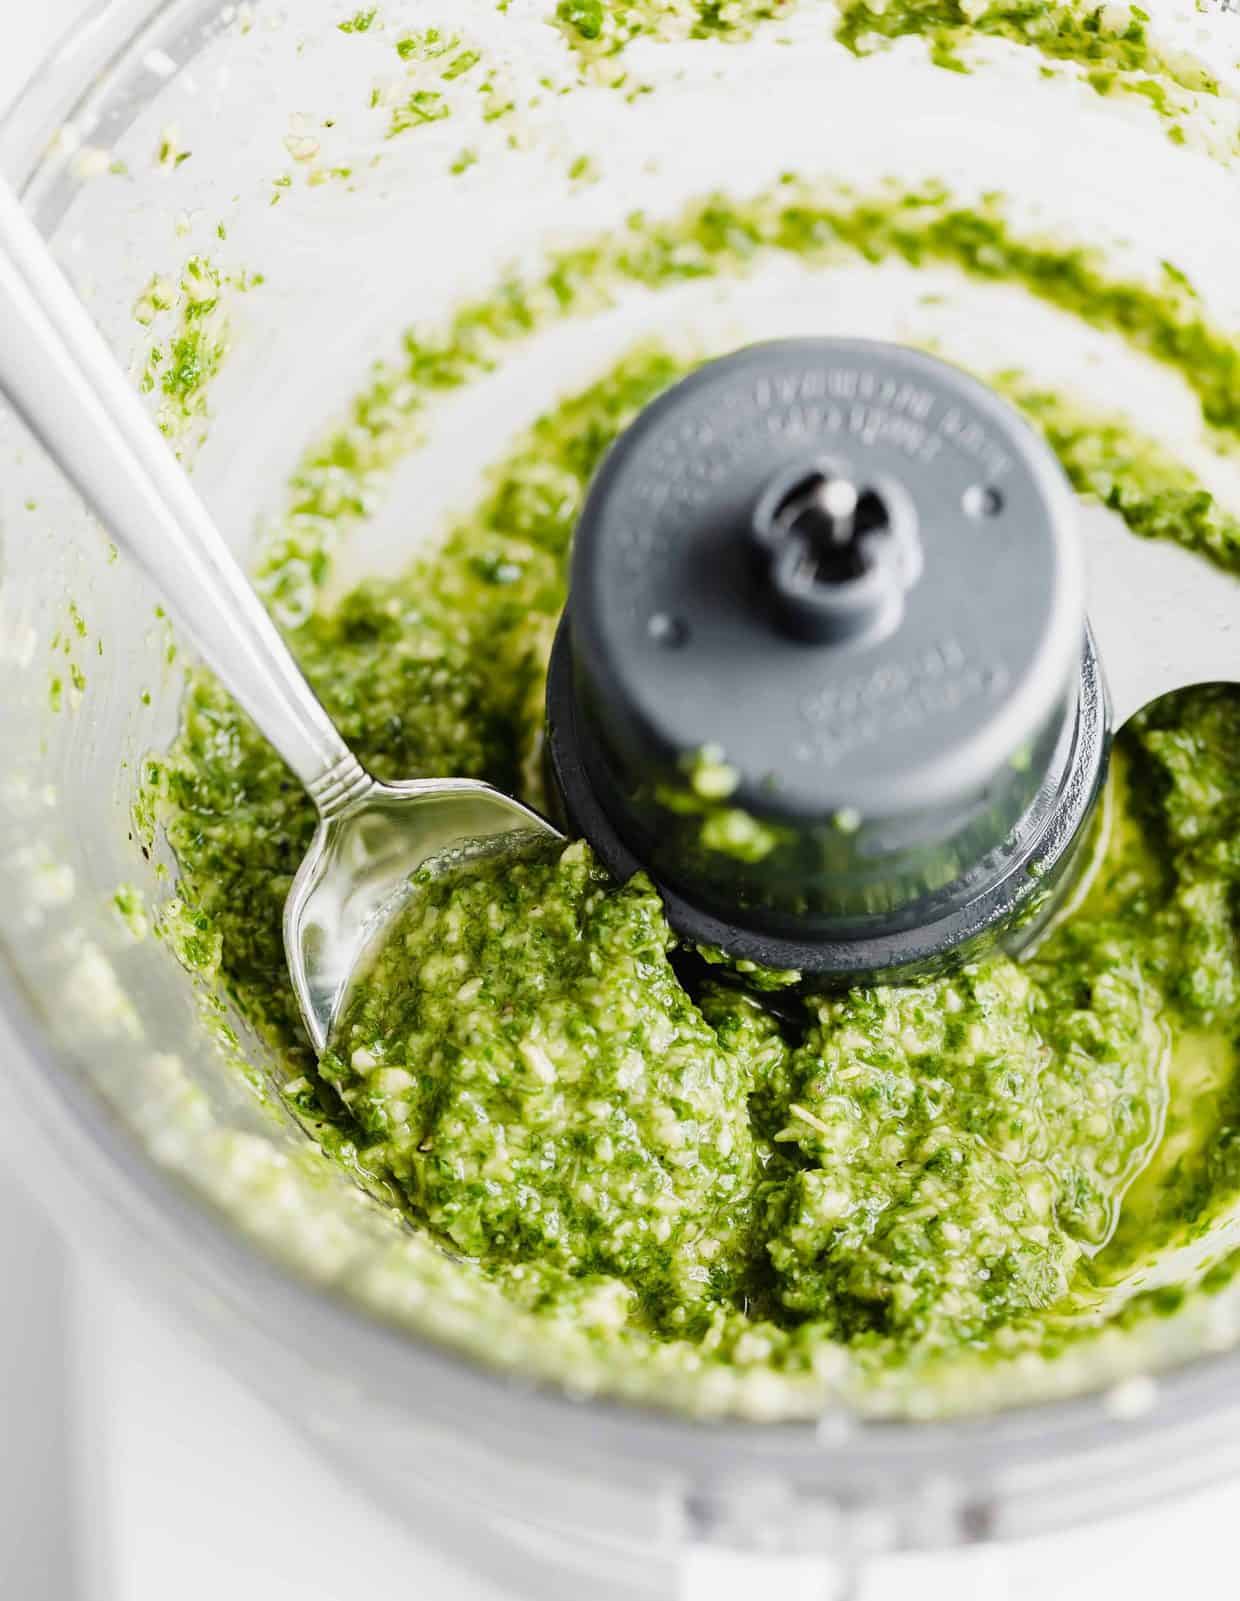 A spoon scooping up fresh basil pesto from a food processor.